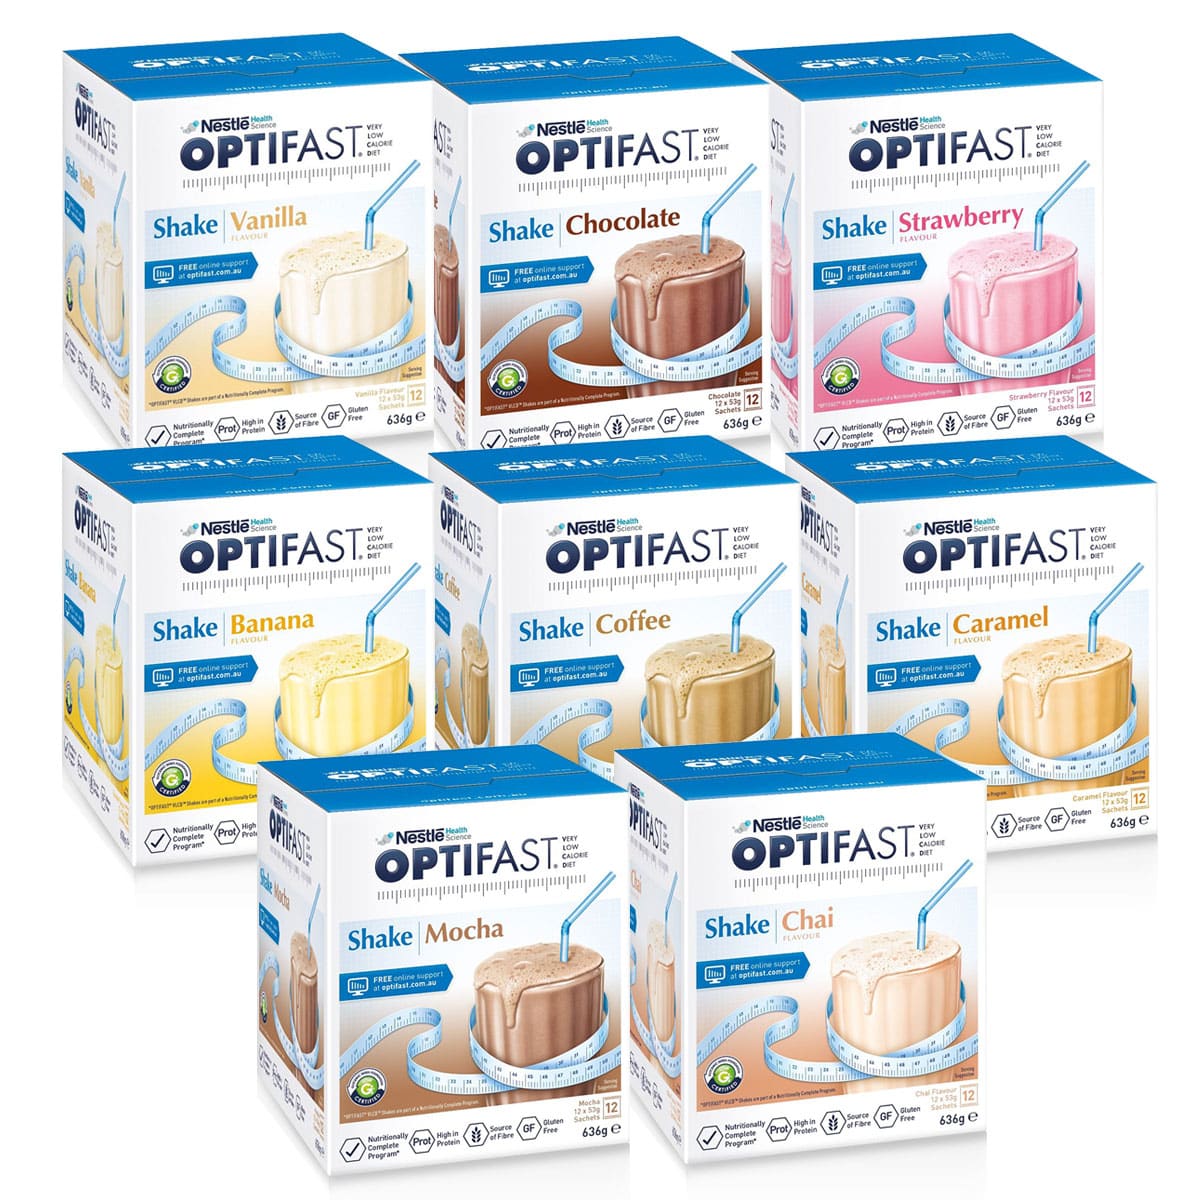 Optifast VLCD Shake 12 x 53g Sachets (636g) Low Calorie Meal Replacement Diet